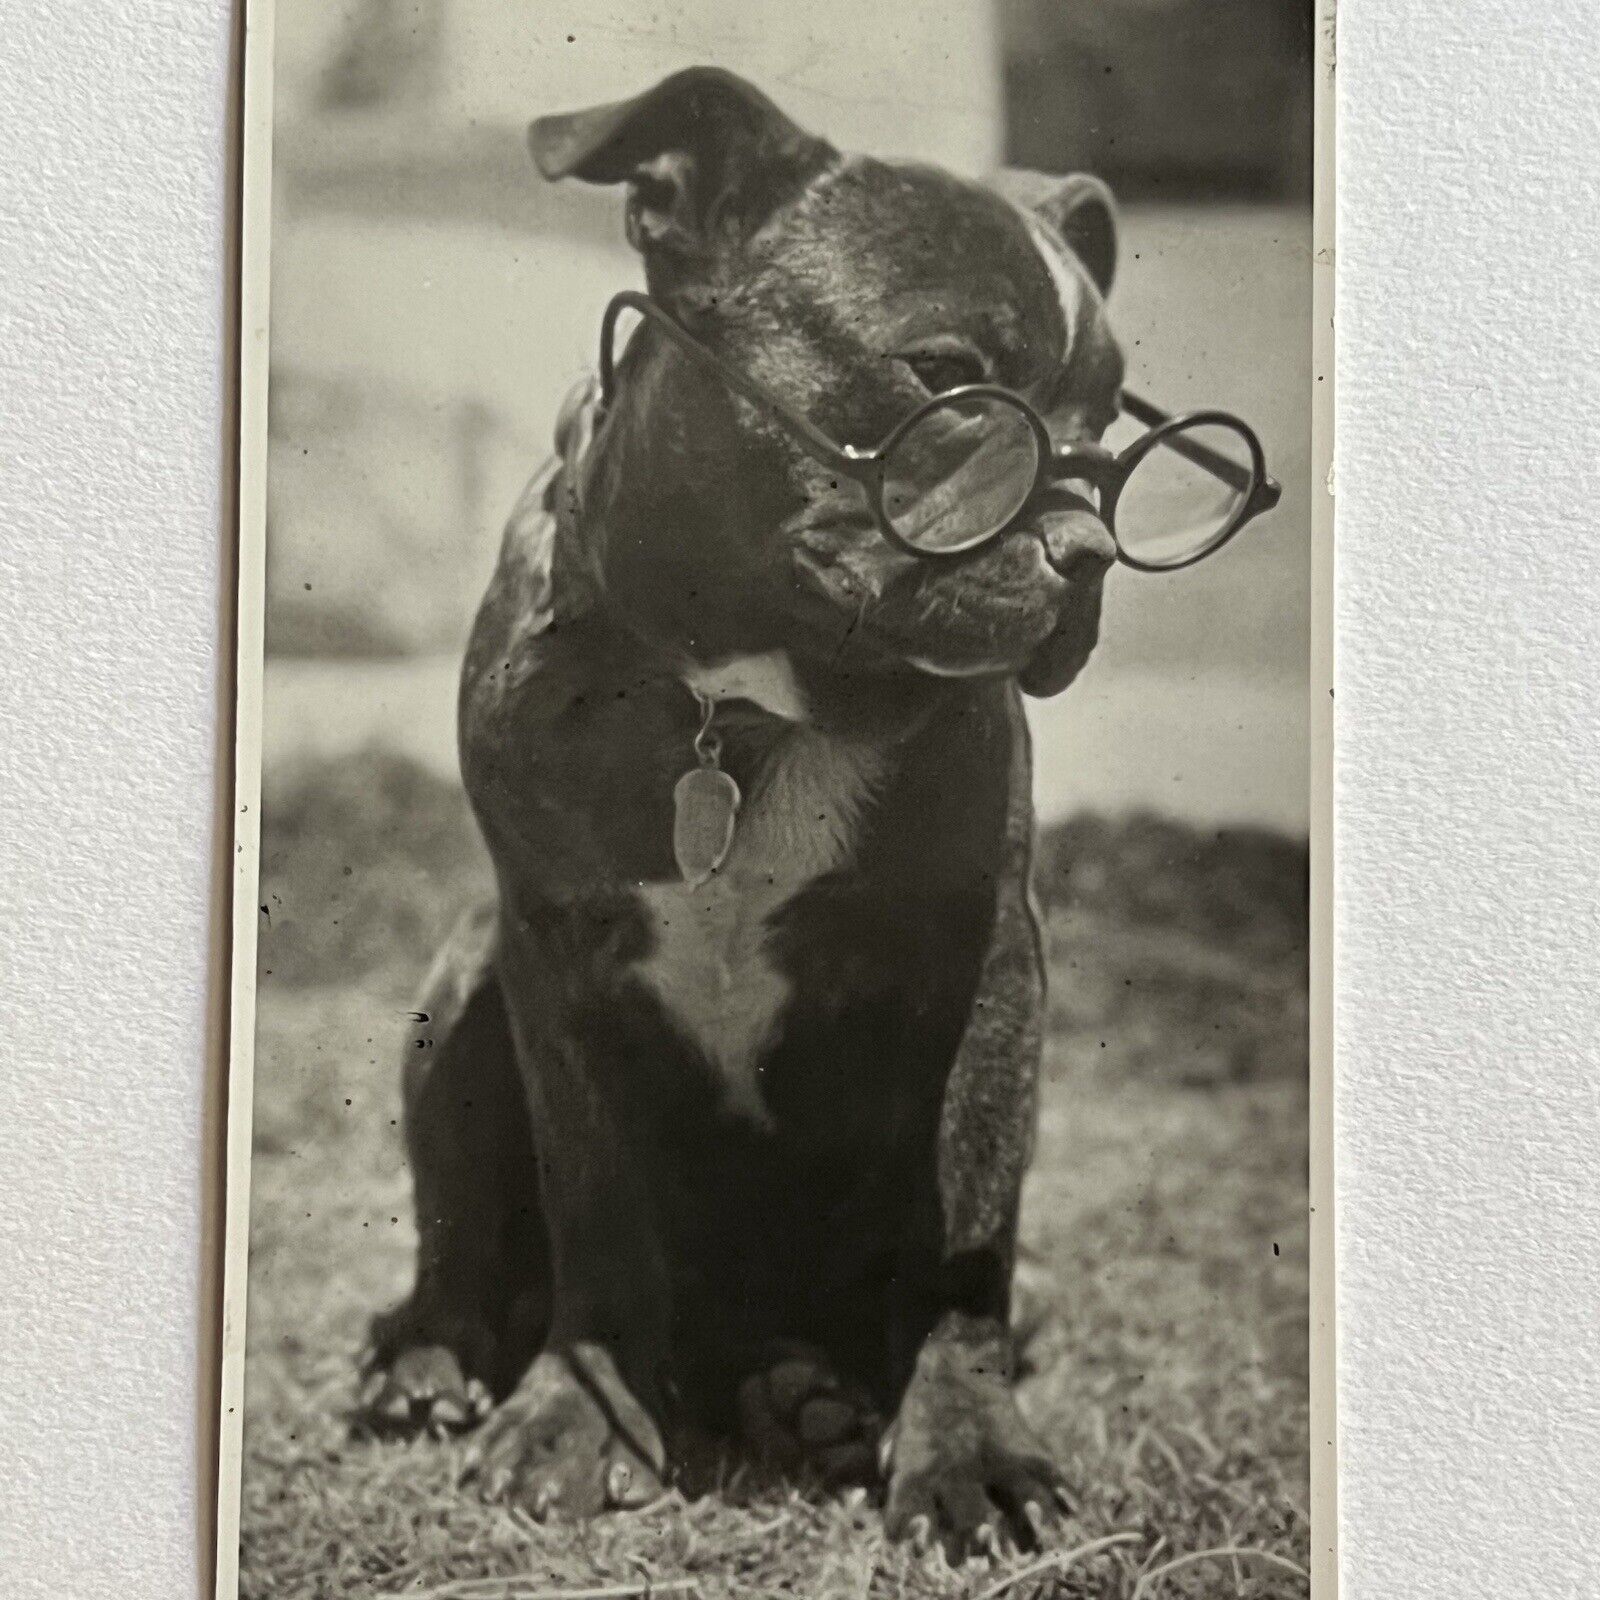 Vintage B&W Snapshot Photograph Adorable Good Boy Pitbull Terrier With Glasses